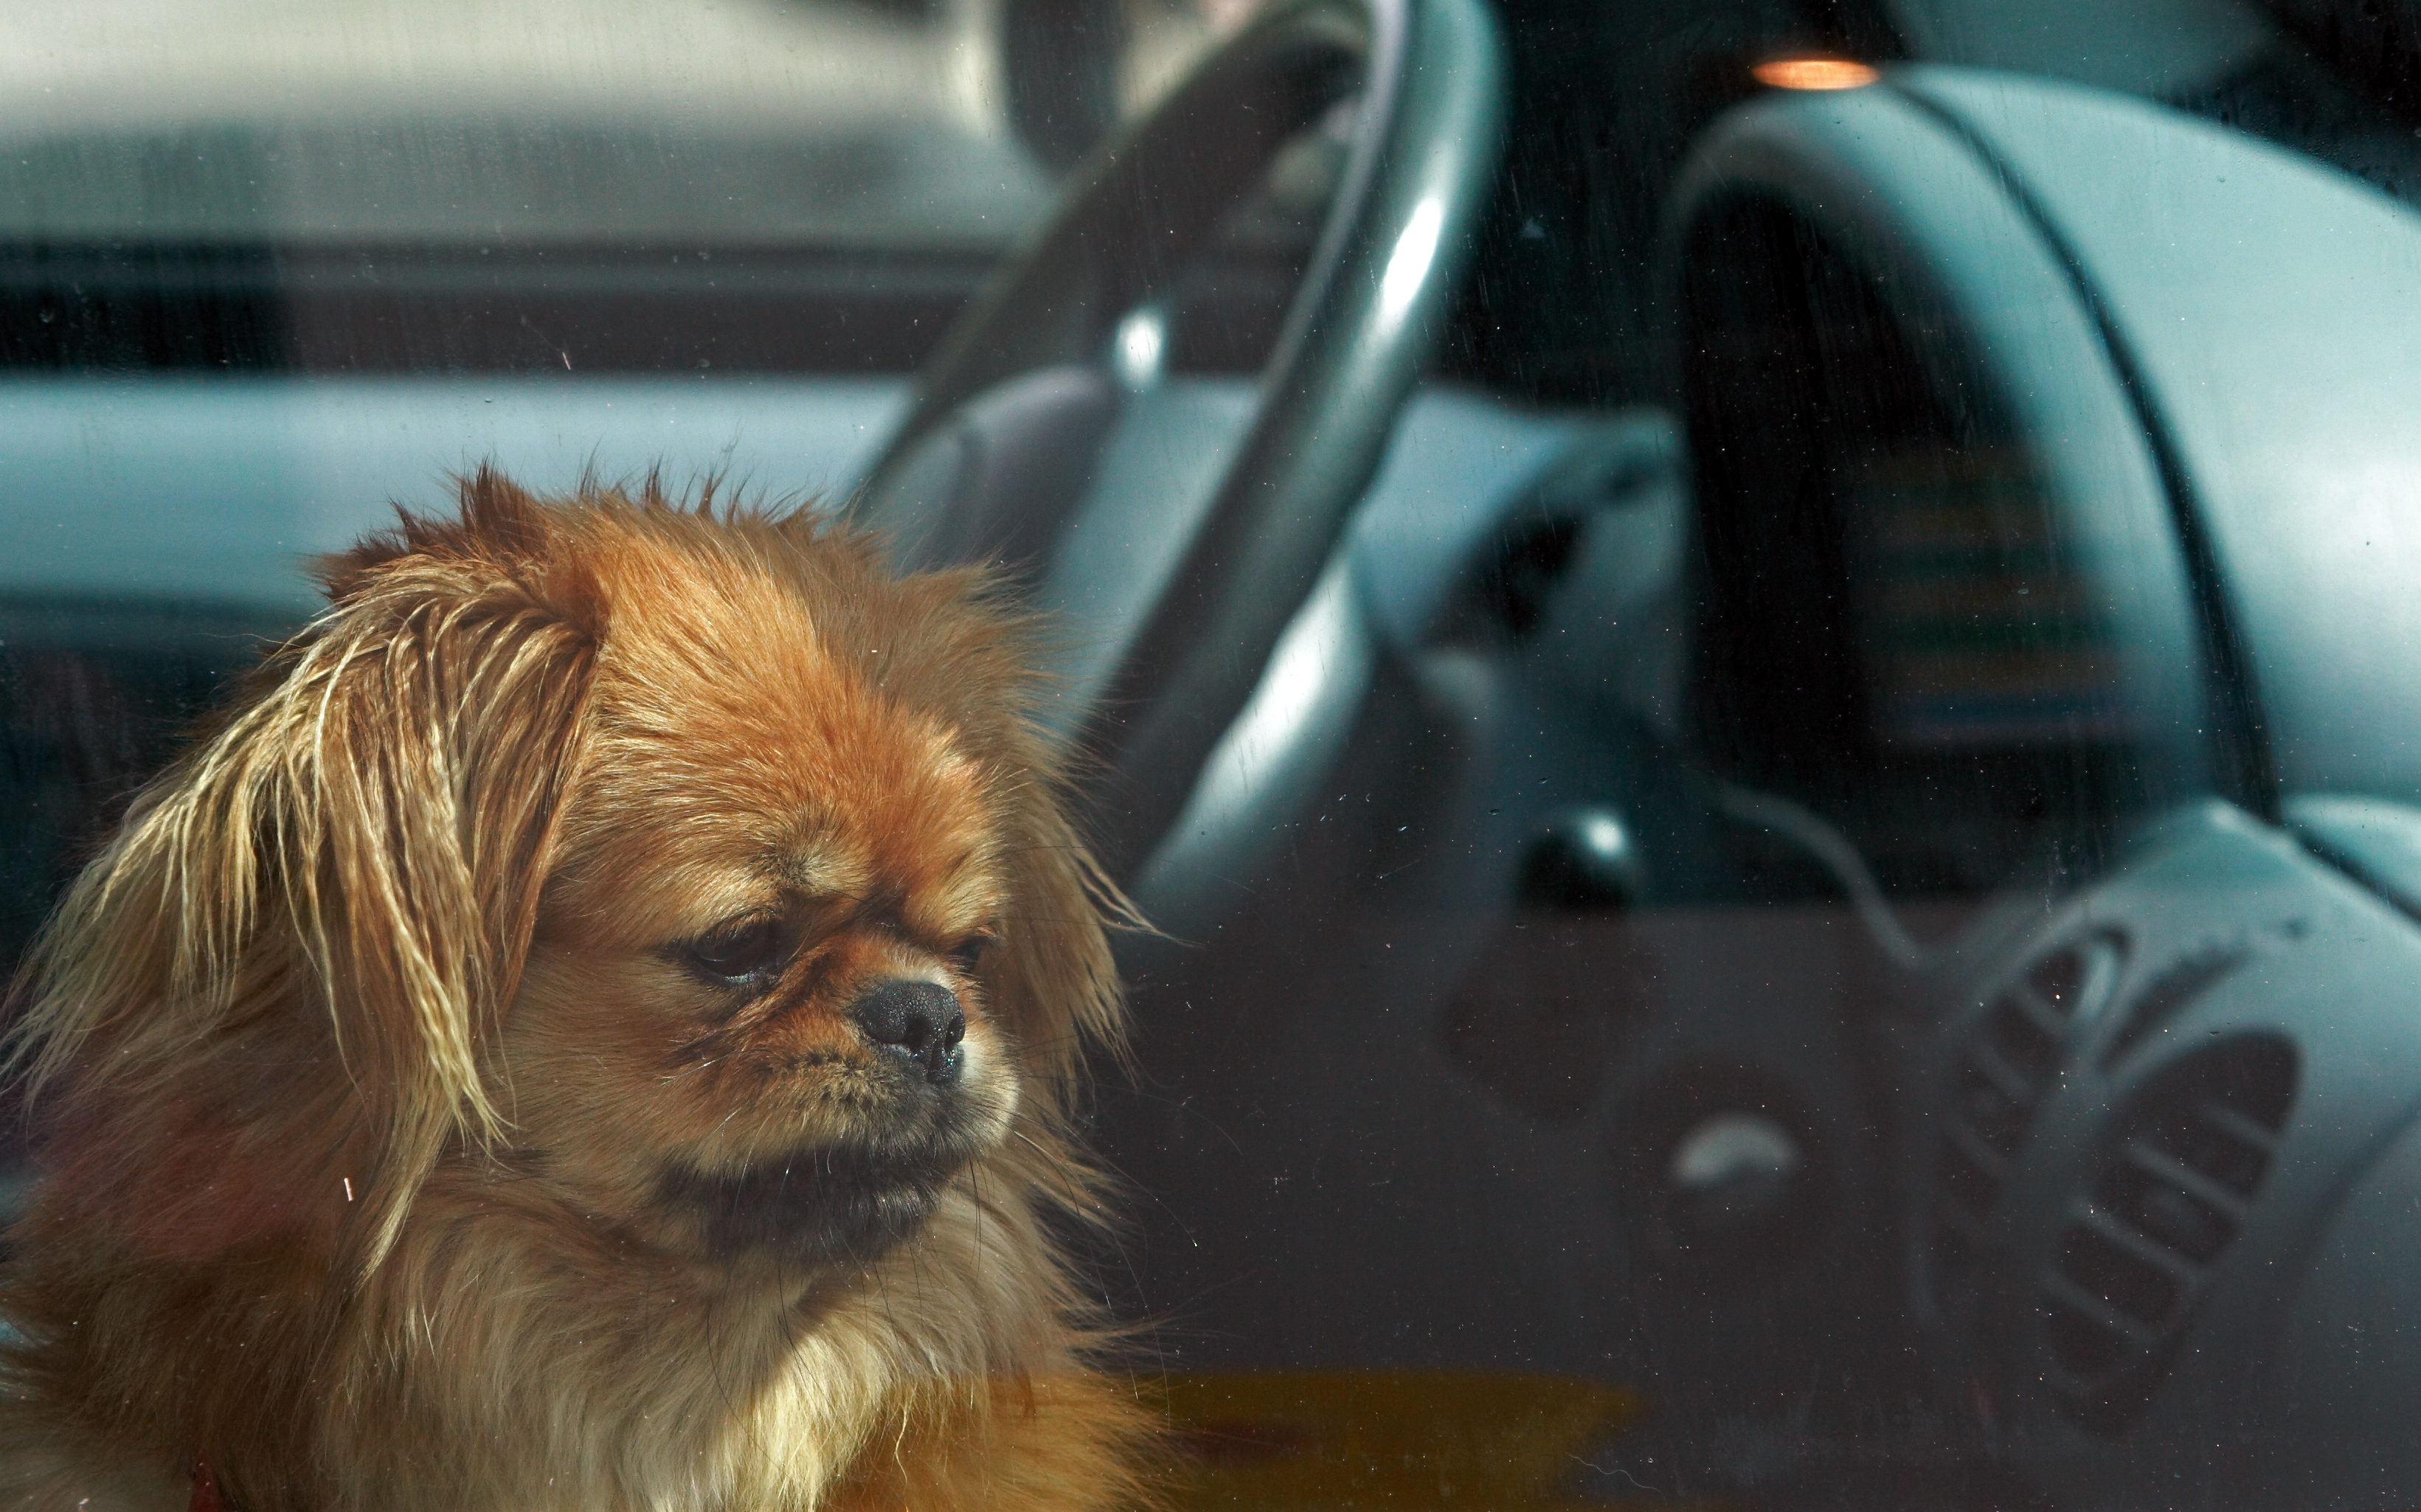 A cute little dog left alone in the car